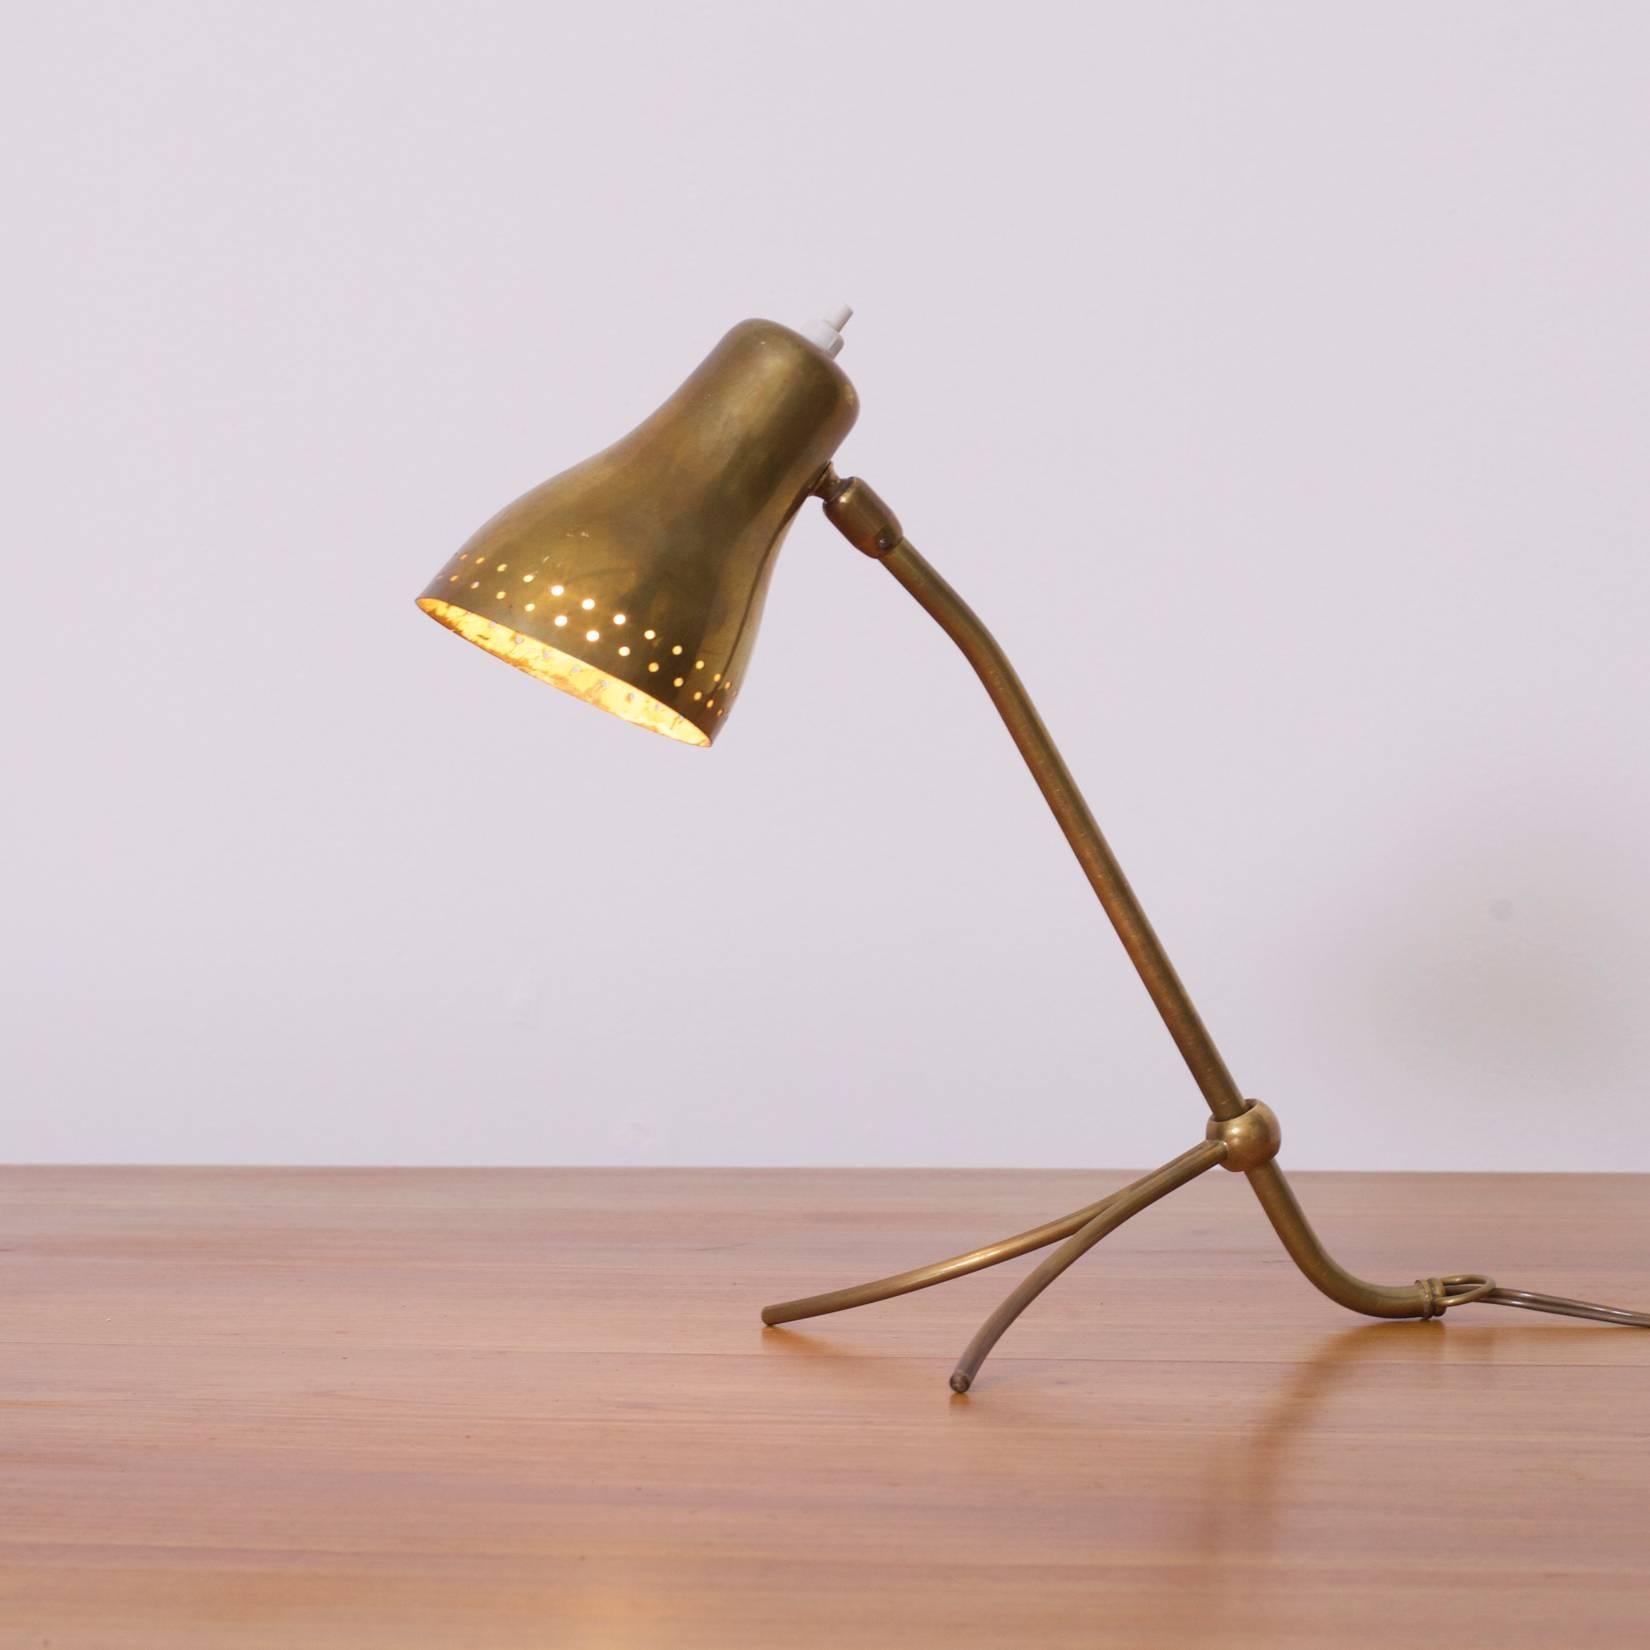 High quality and elegant french table lamp from the 1950s.
1x small bajonette fitting